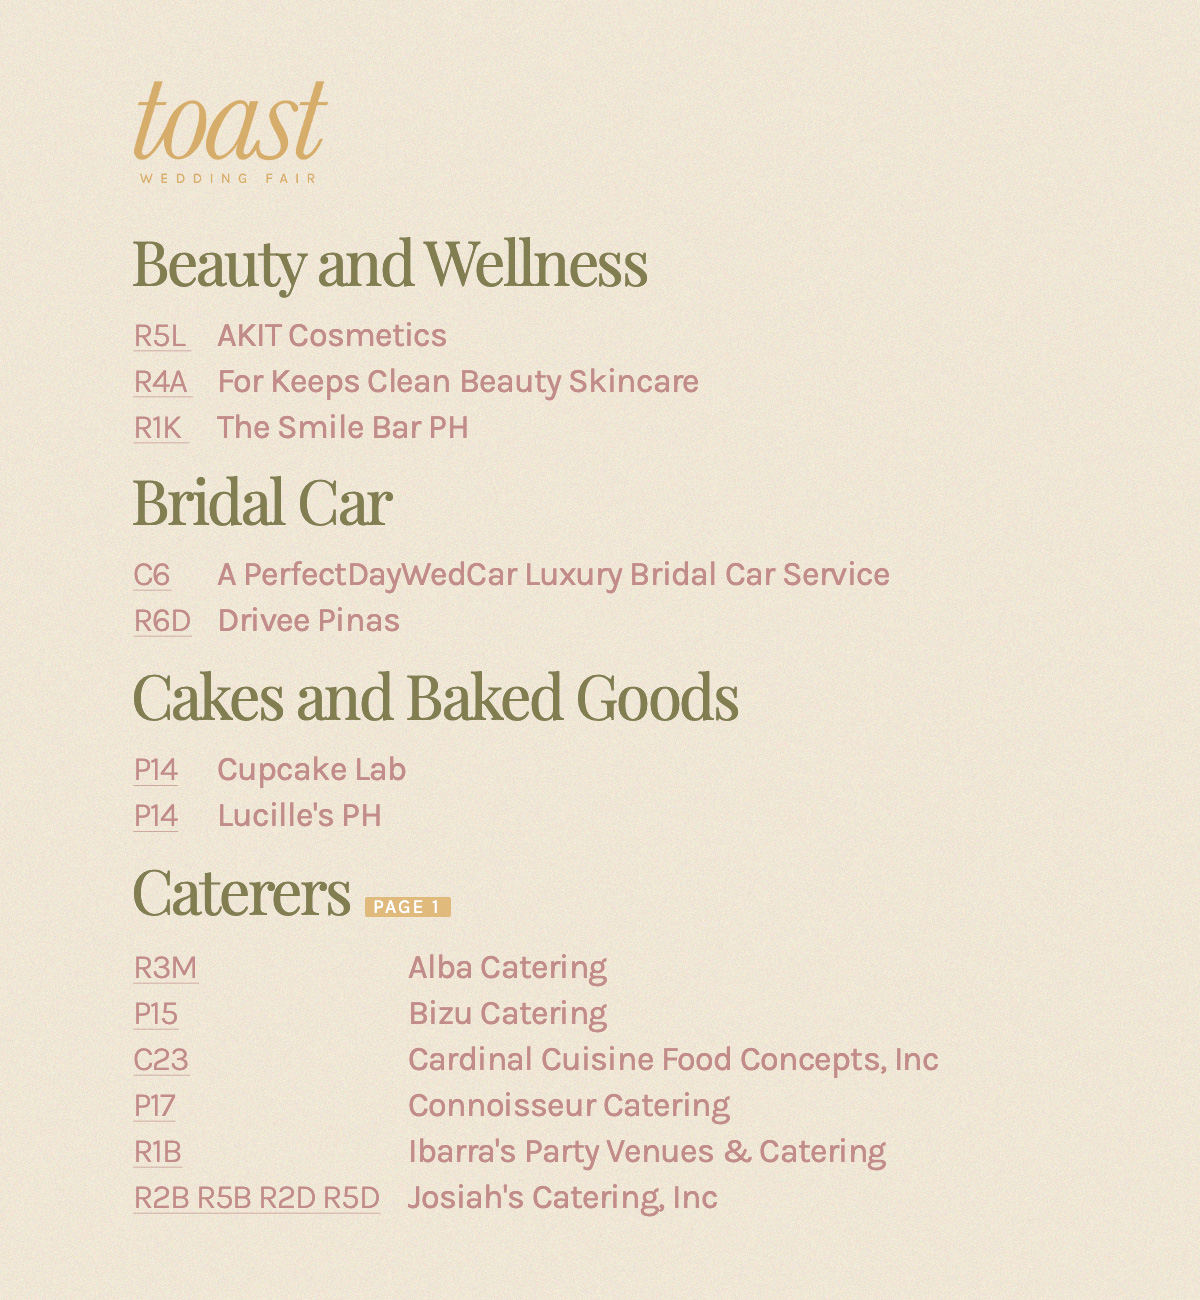 Beauty and Wellness R5L AKIT Cosmetics R4A For Keeps Clean Beauty Skincare R1K The Smile Bar PH Bridal Car C6 A PerfectDayWedCar Luxury Bridal Car Service R6D Drivee Pinas Cakes and Baked Goods P14 Cupcake Lab P14 Lucille's PH Caterers R3M Alba Catering P15 Bizu Catering C23 Cardinal Cuisine Food Concepts, Inc P17 Connoisseur Catering R1B Ibarra's Party Venues & Catering R2B R5B R2D R5D Josiah's Catering, Inc